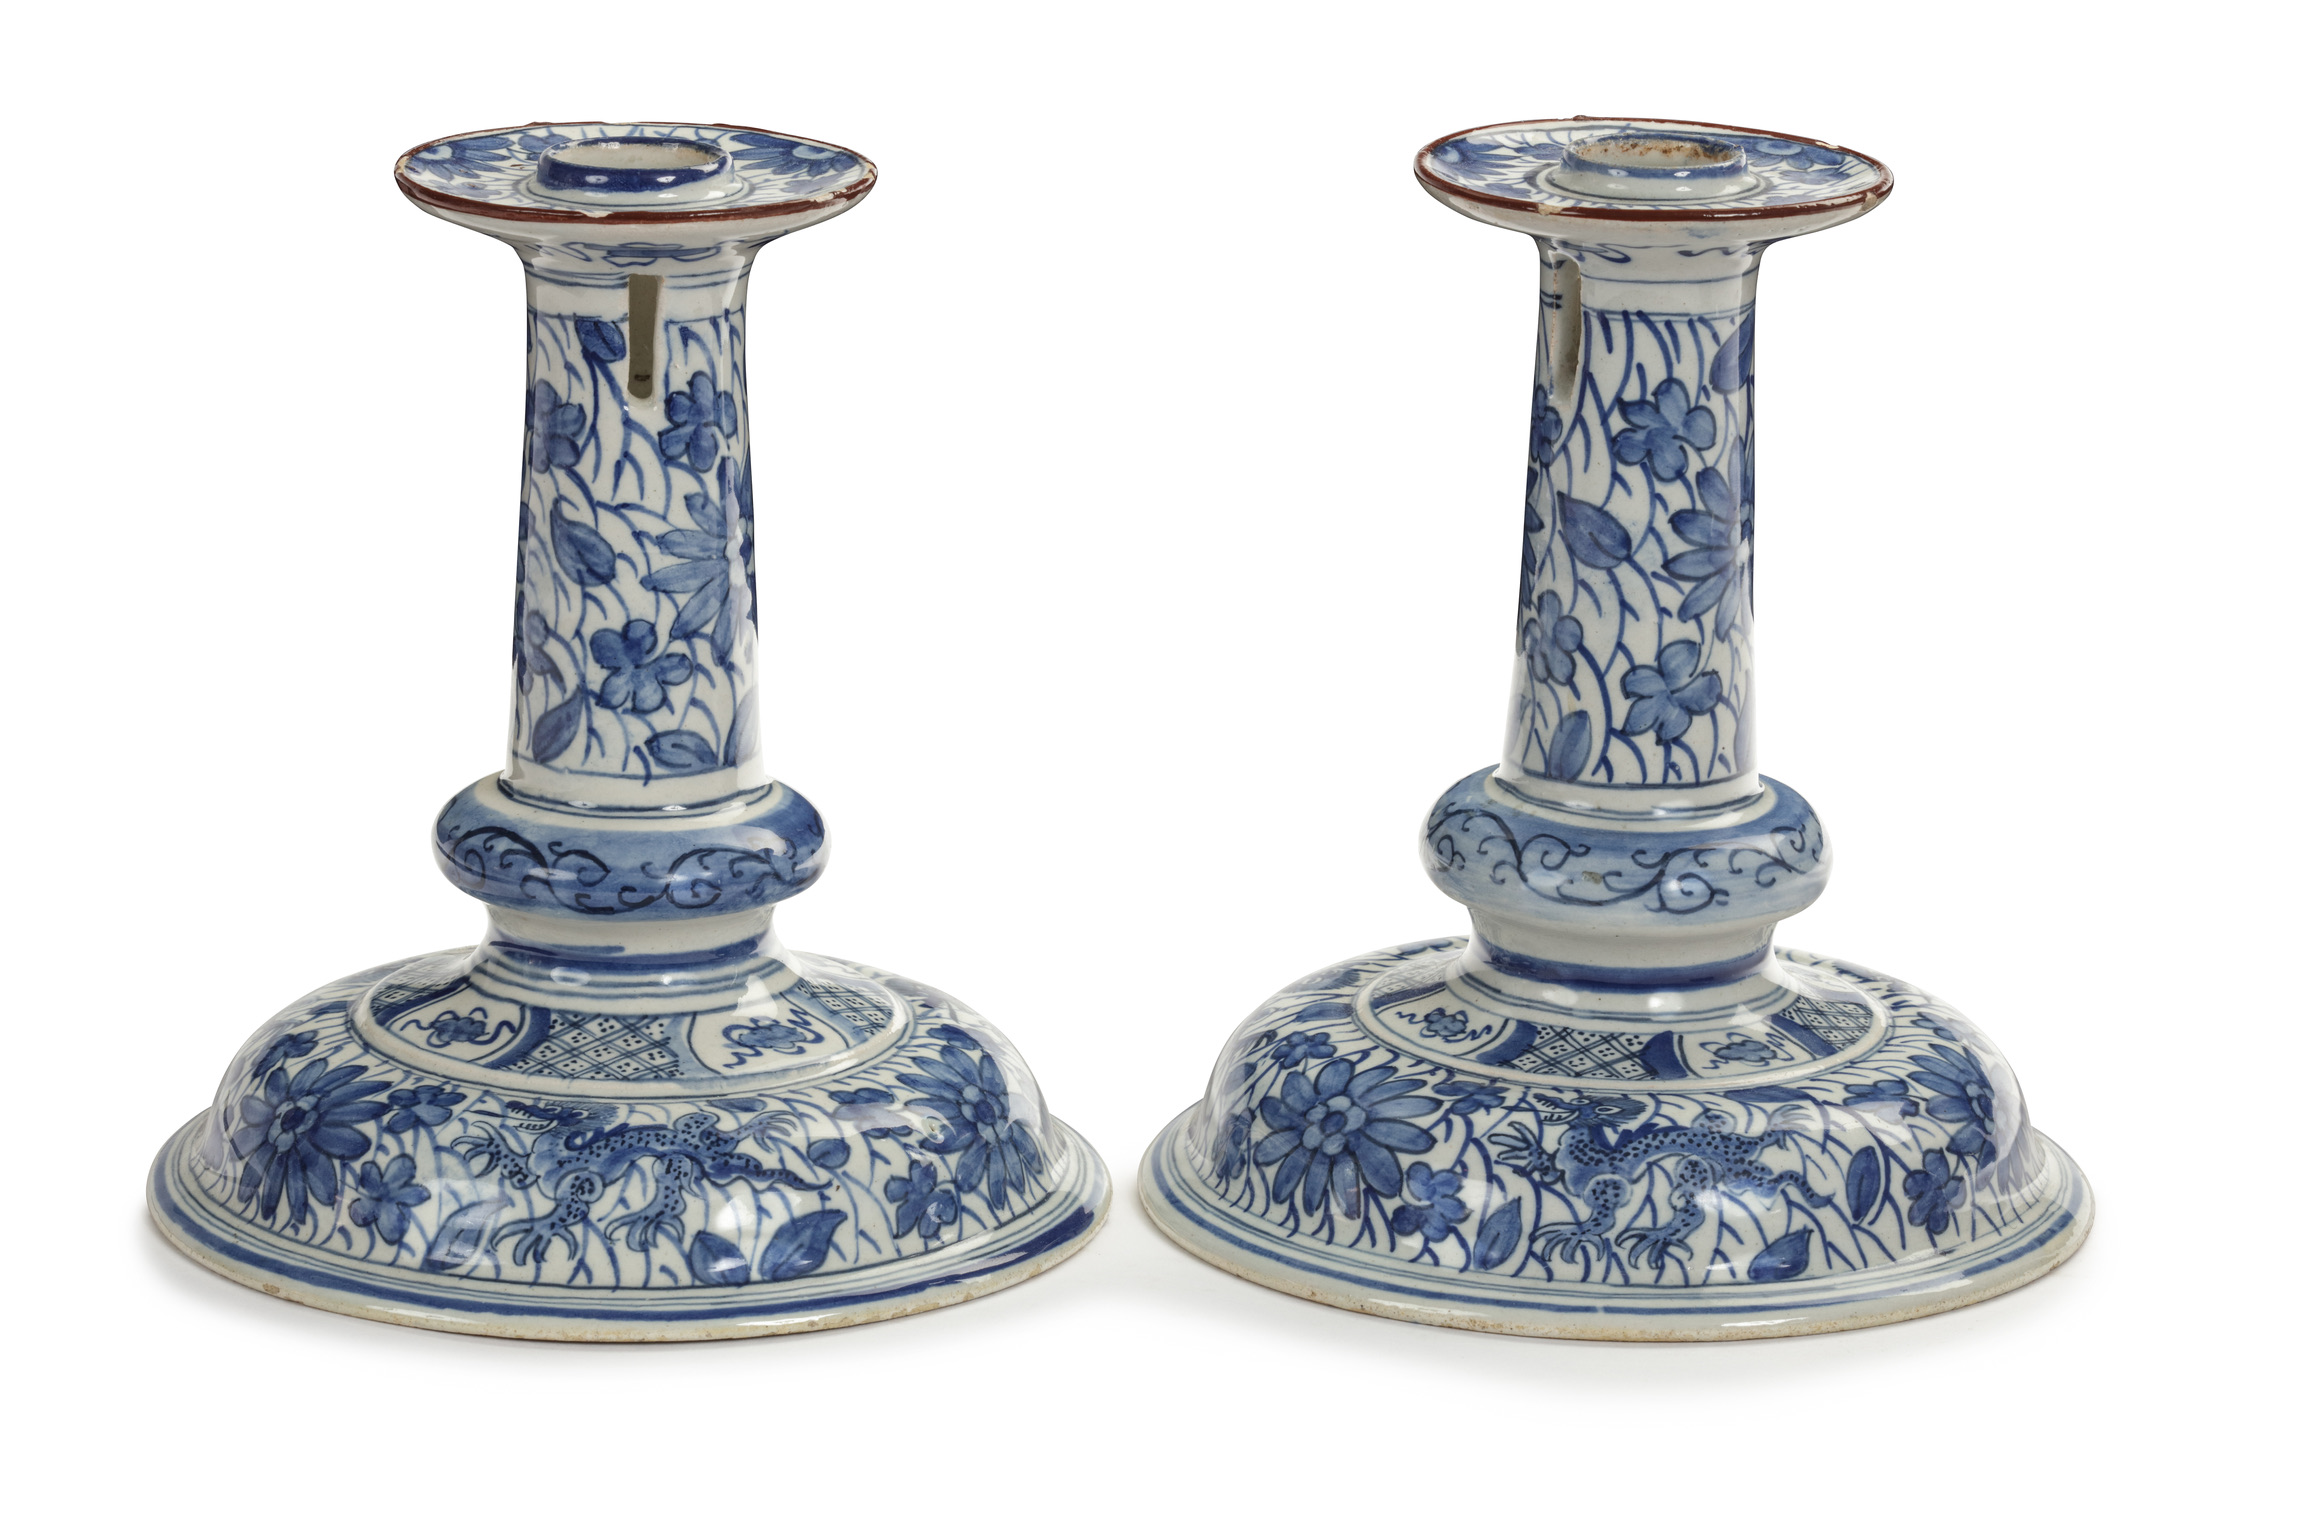 D2325. Pair of Blue and White Candlesticks